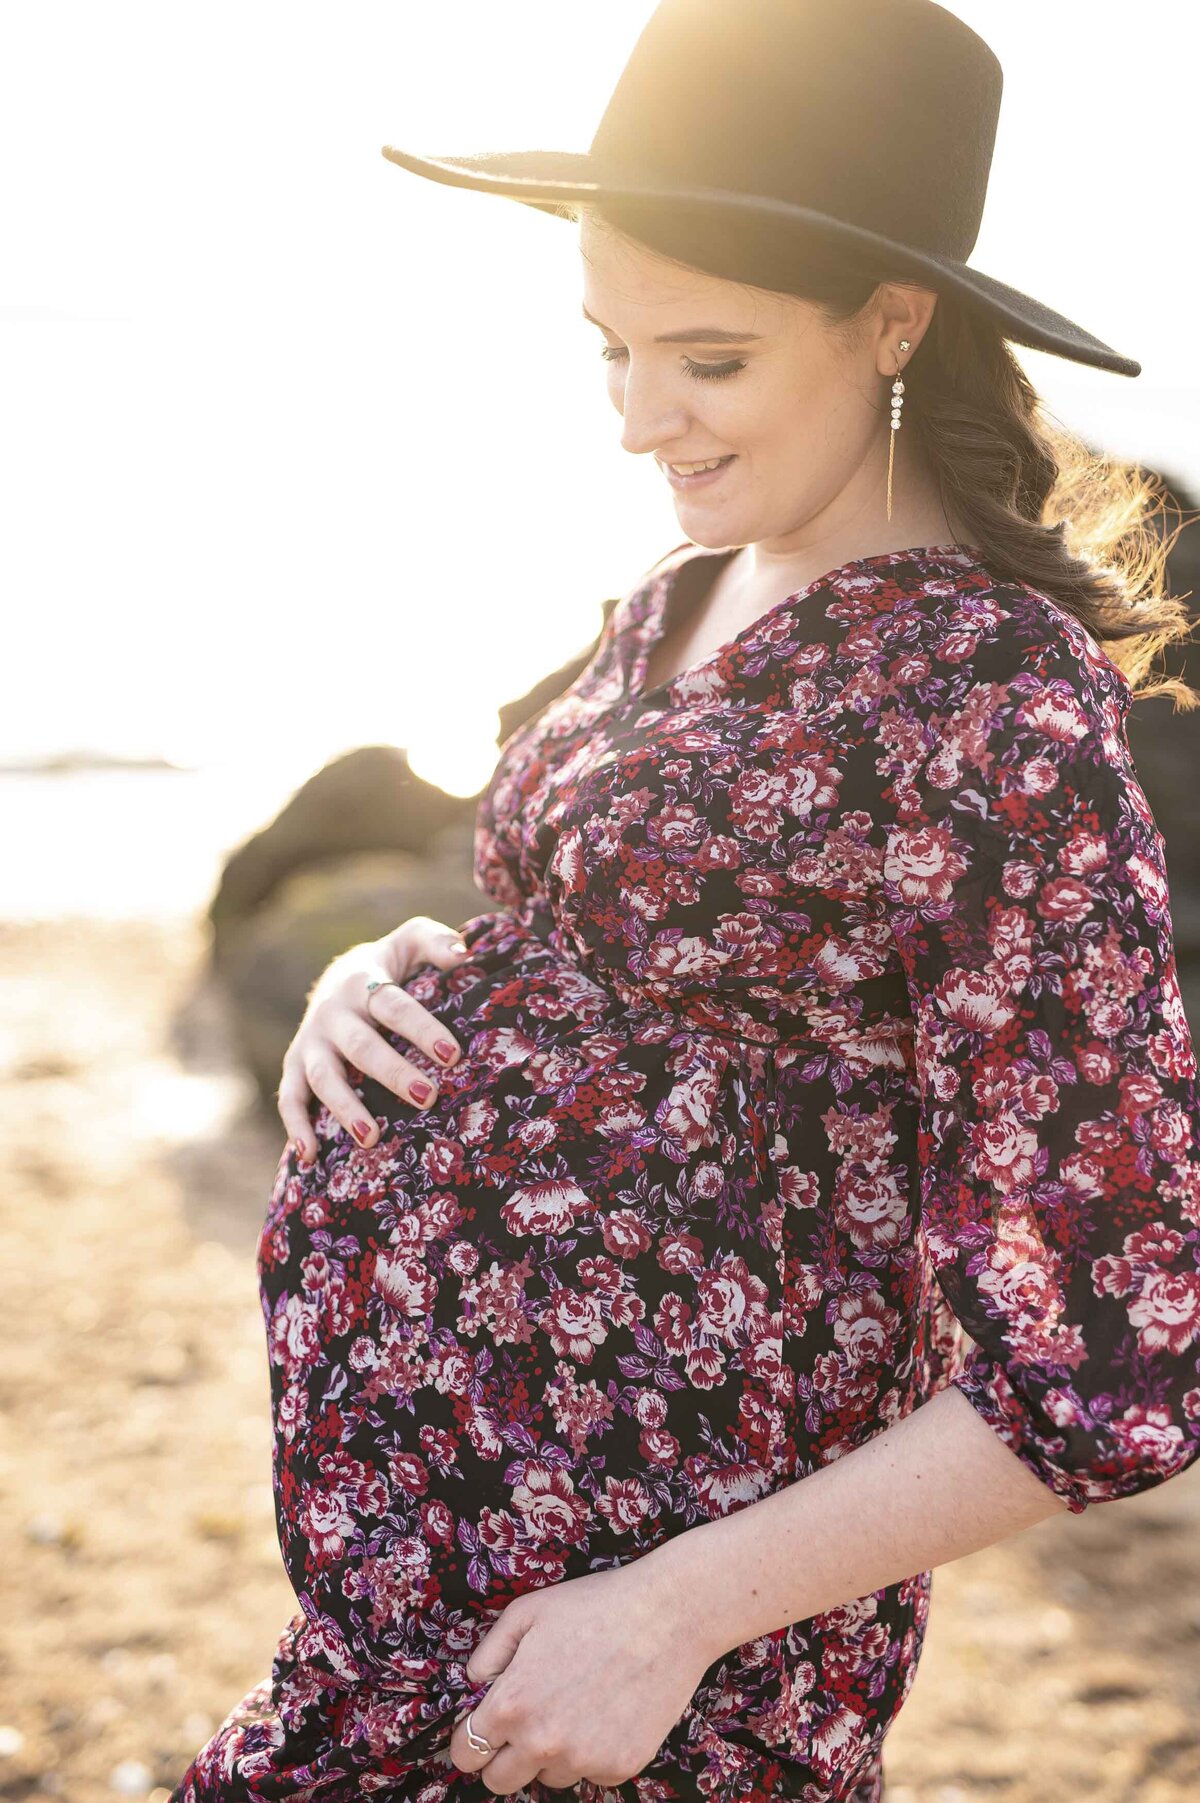 Norman & Devon’s CT coastal maternity session photographed by Schwalbs Photography